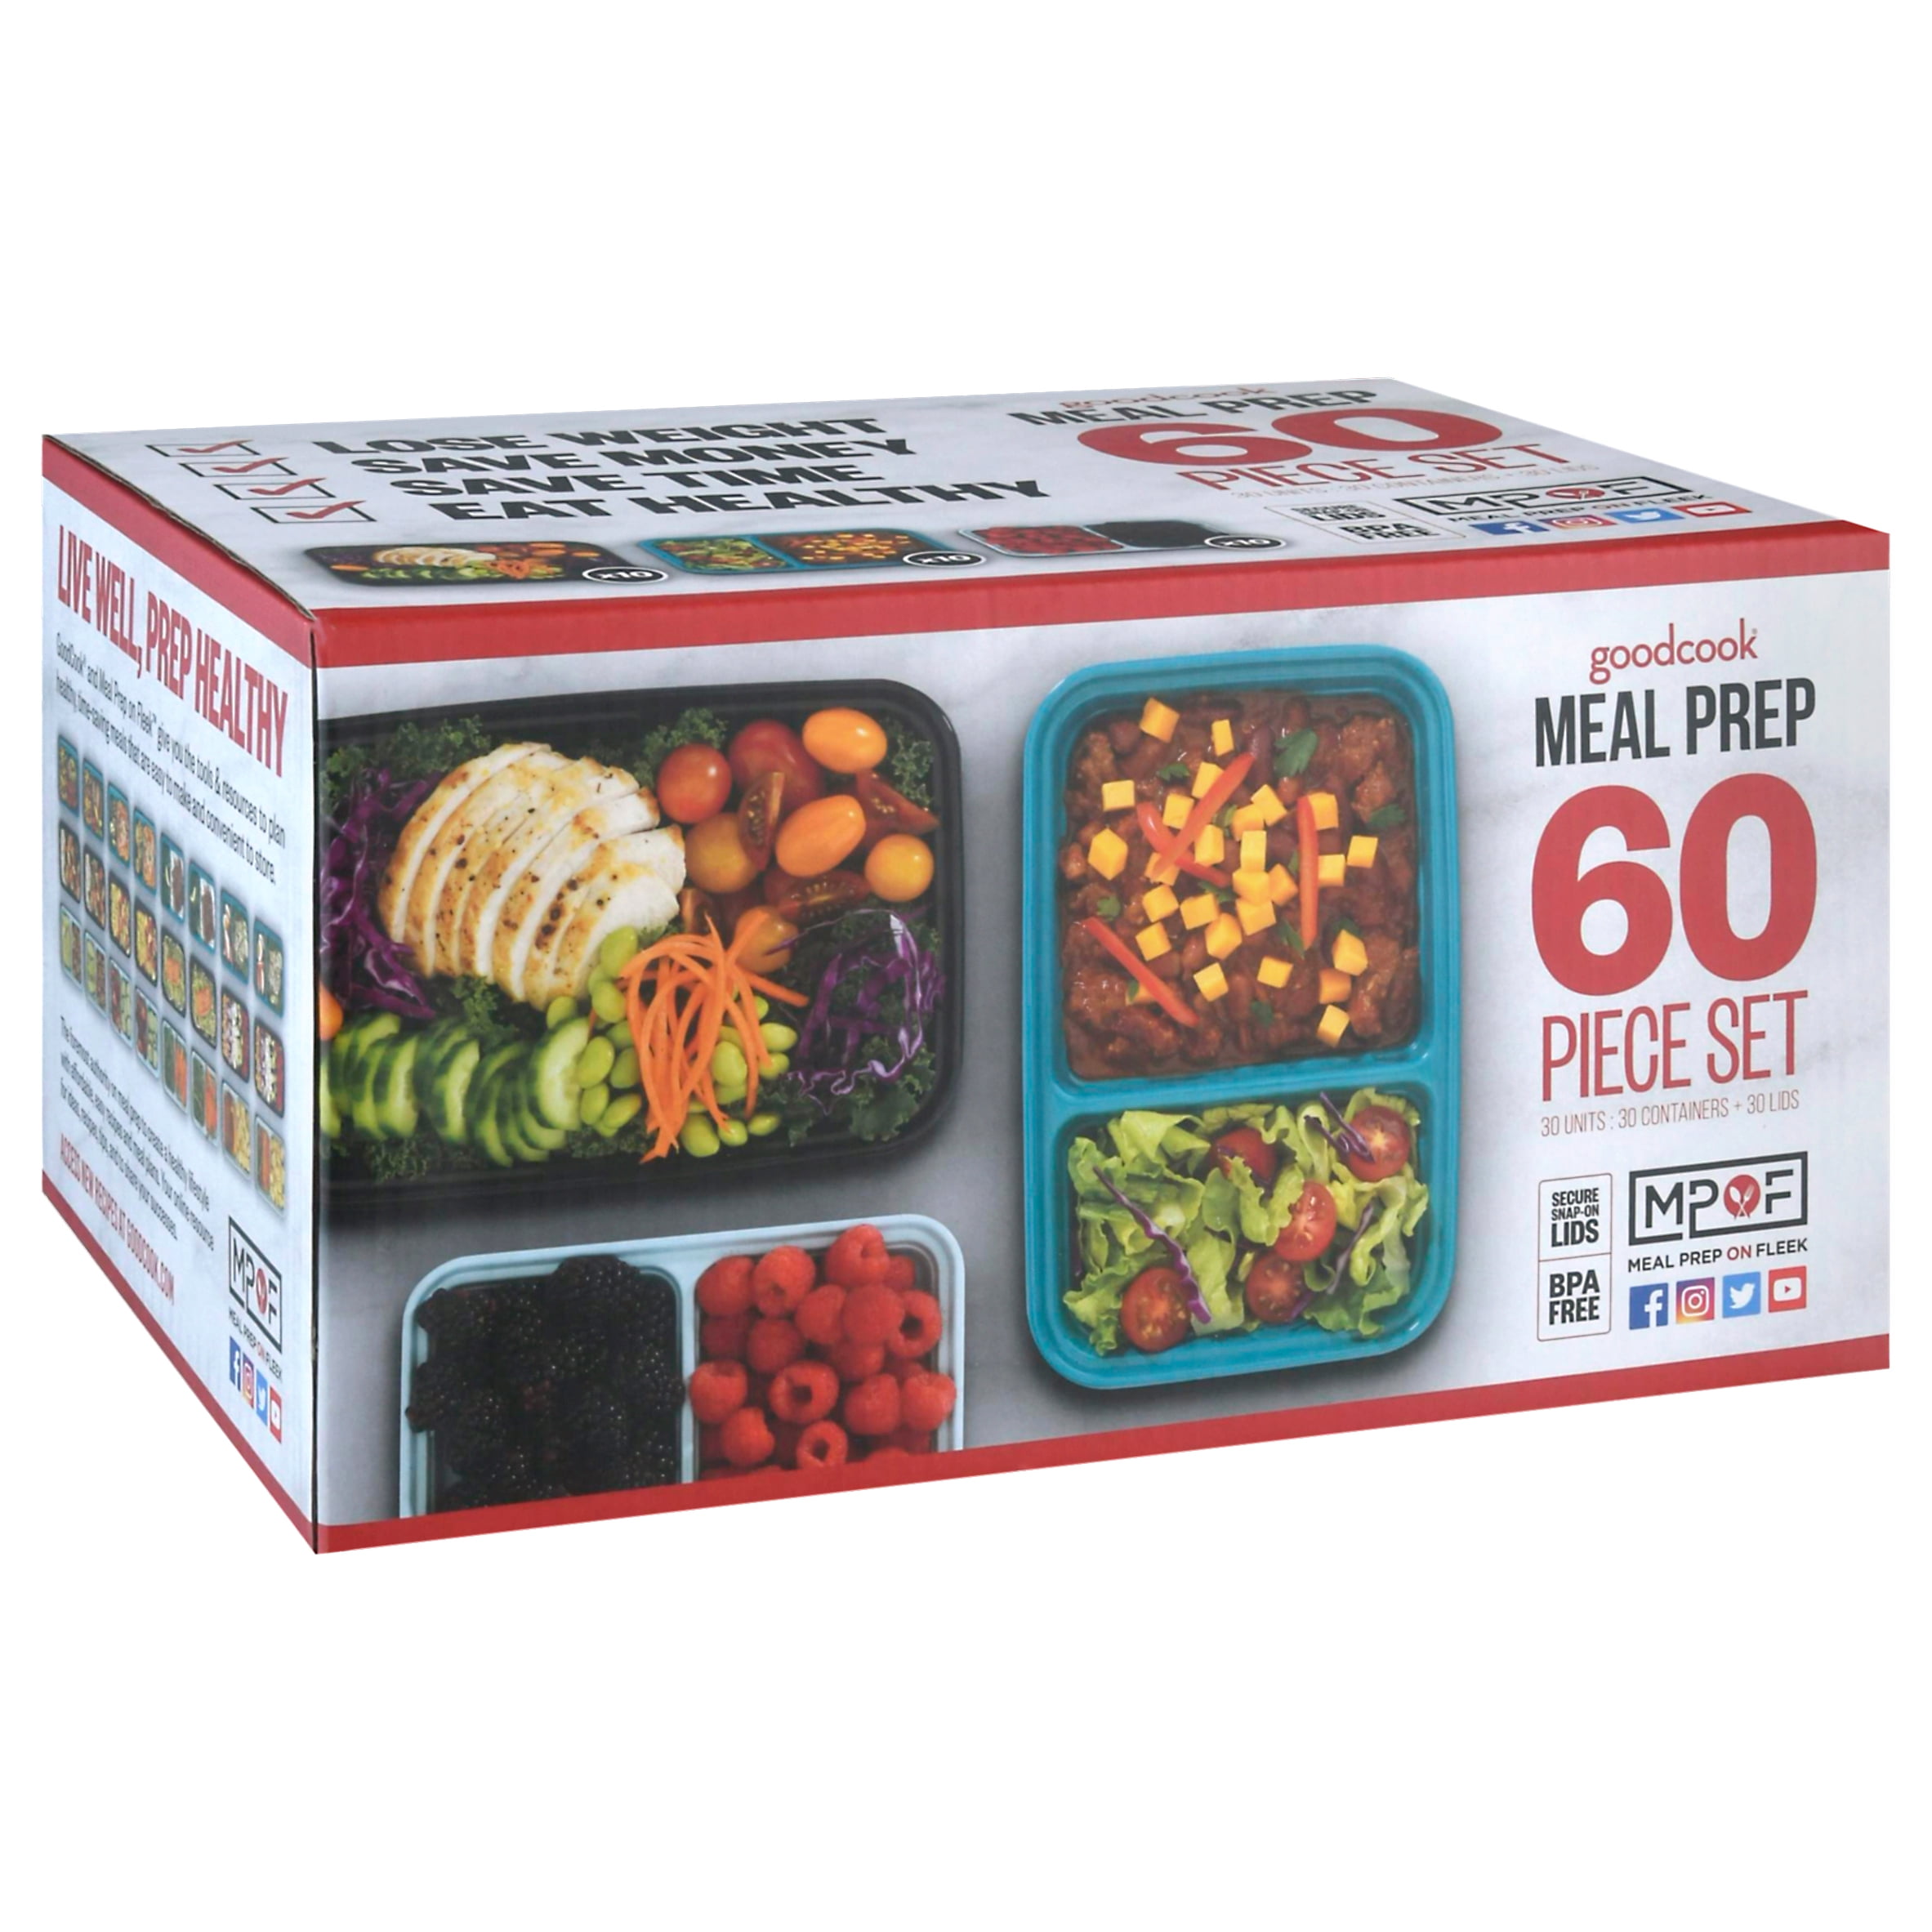 GoodCook Meal Prep Containers are B1G1 FREE at Kroger! - Kroger Krazy